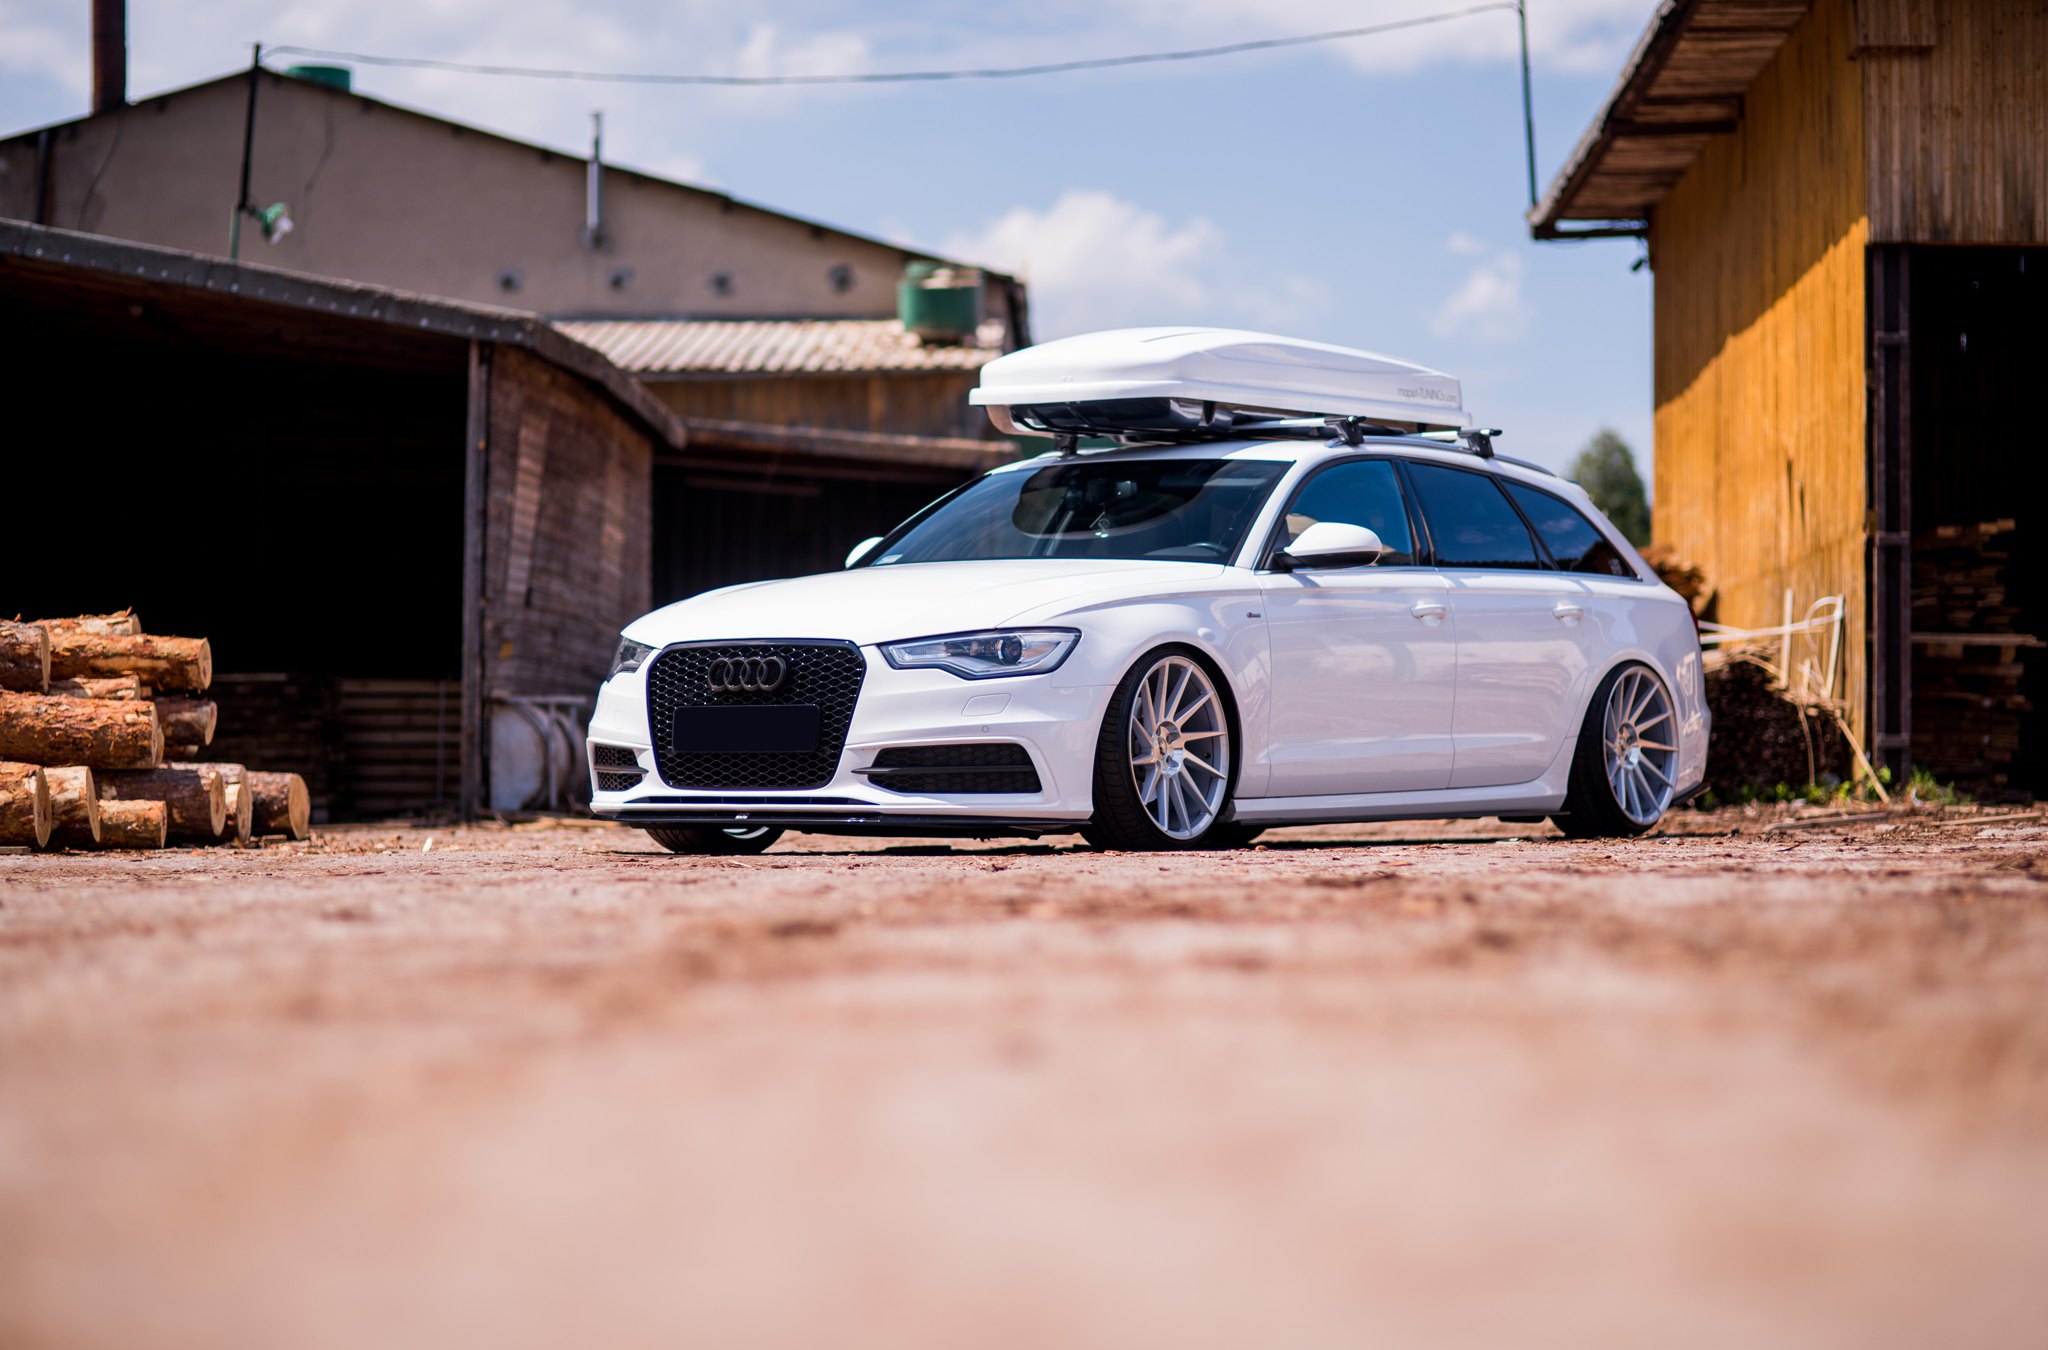 Blacked Out Mesh Grille on White Audi A6 - Photo by JR Wheels